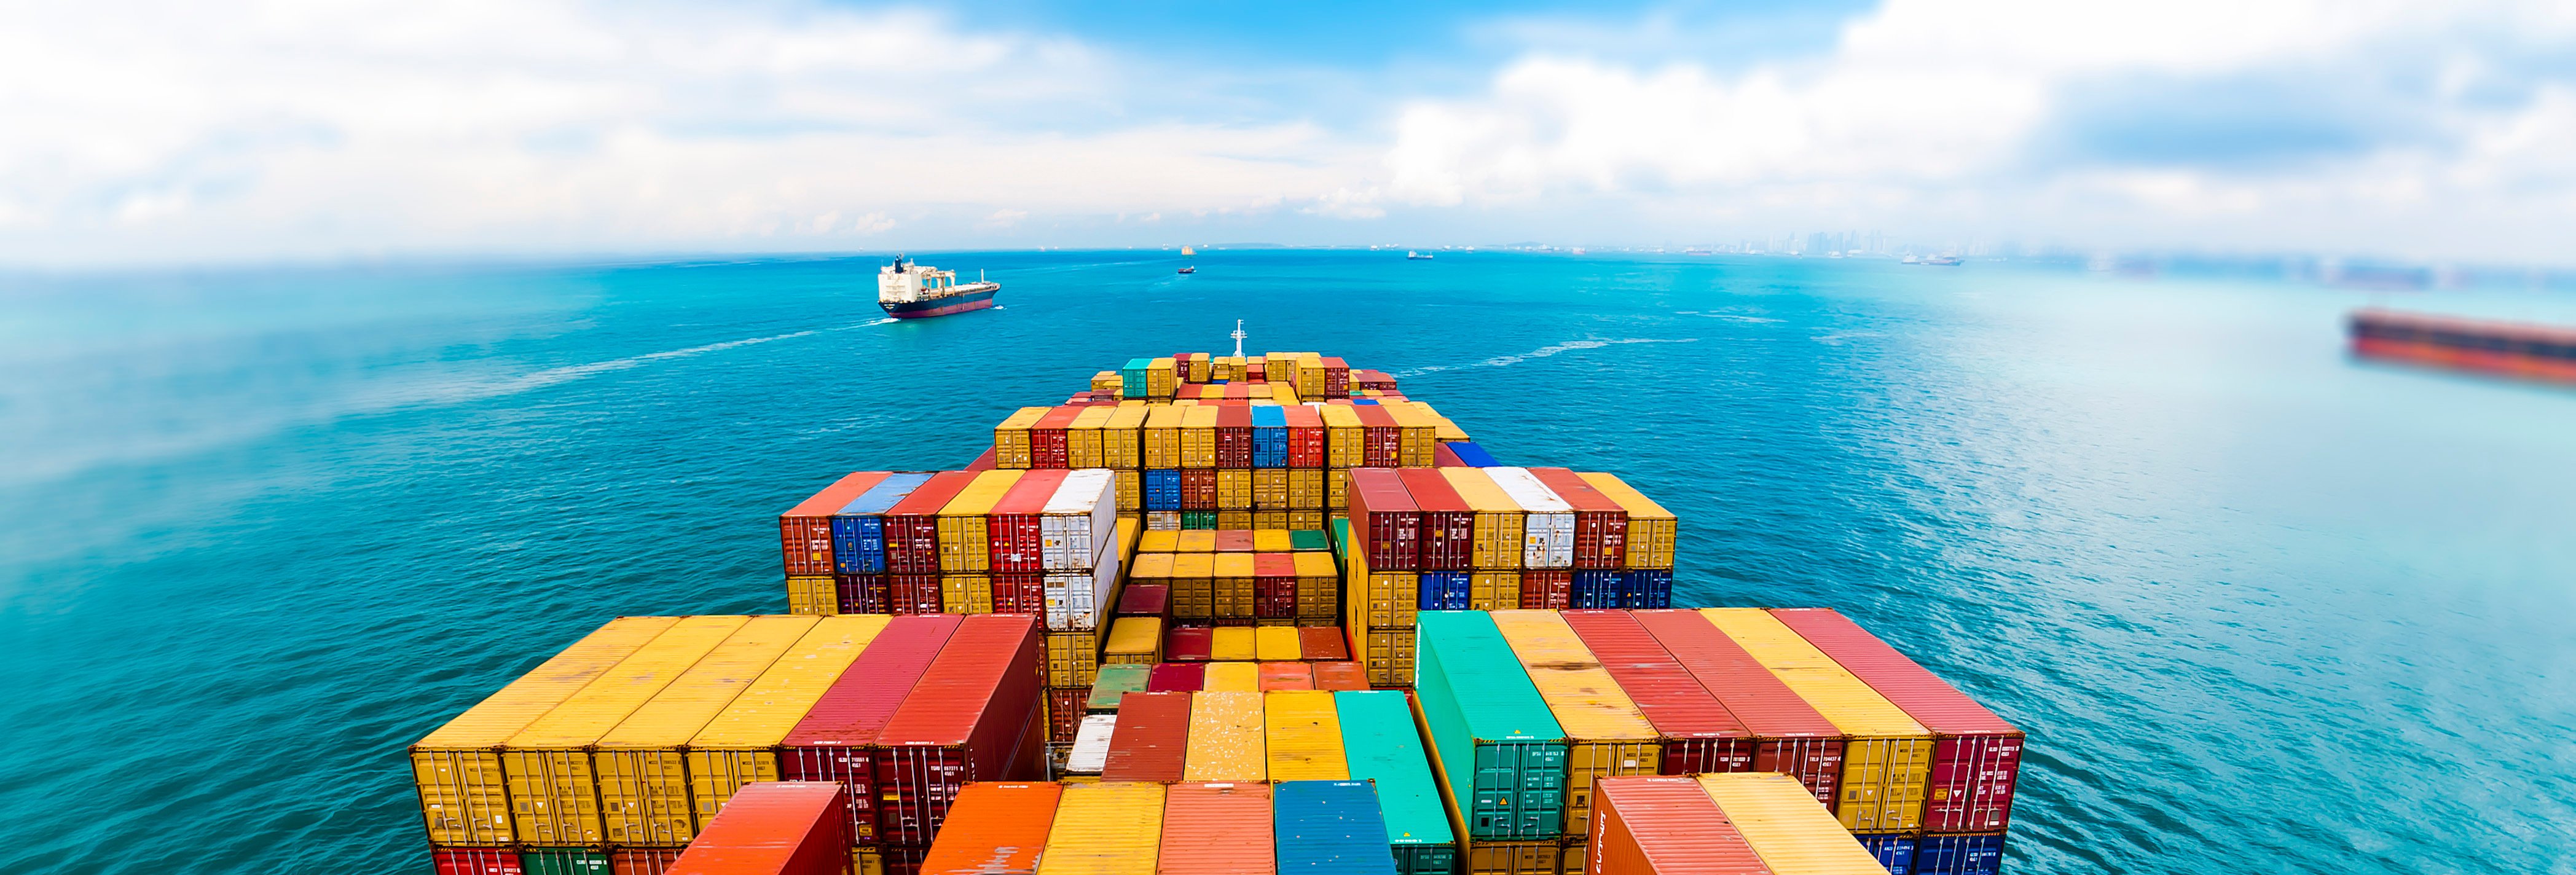 AdobeStock_86528443 shipping containers